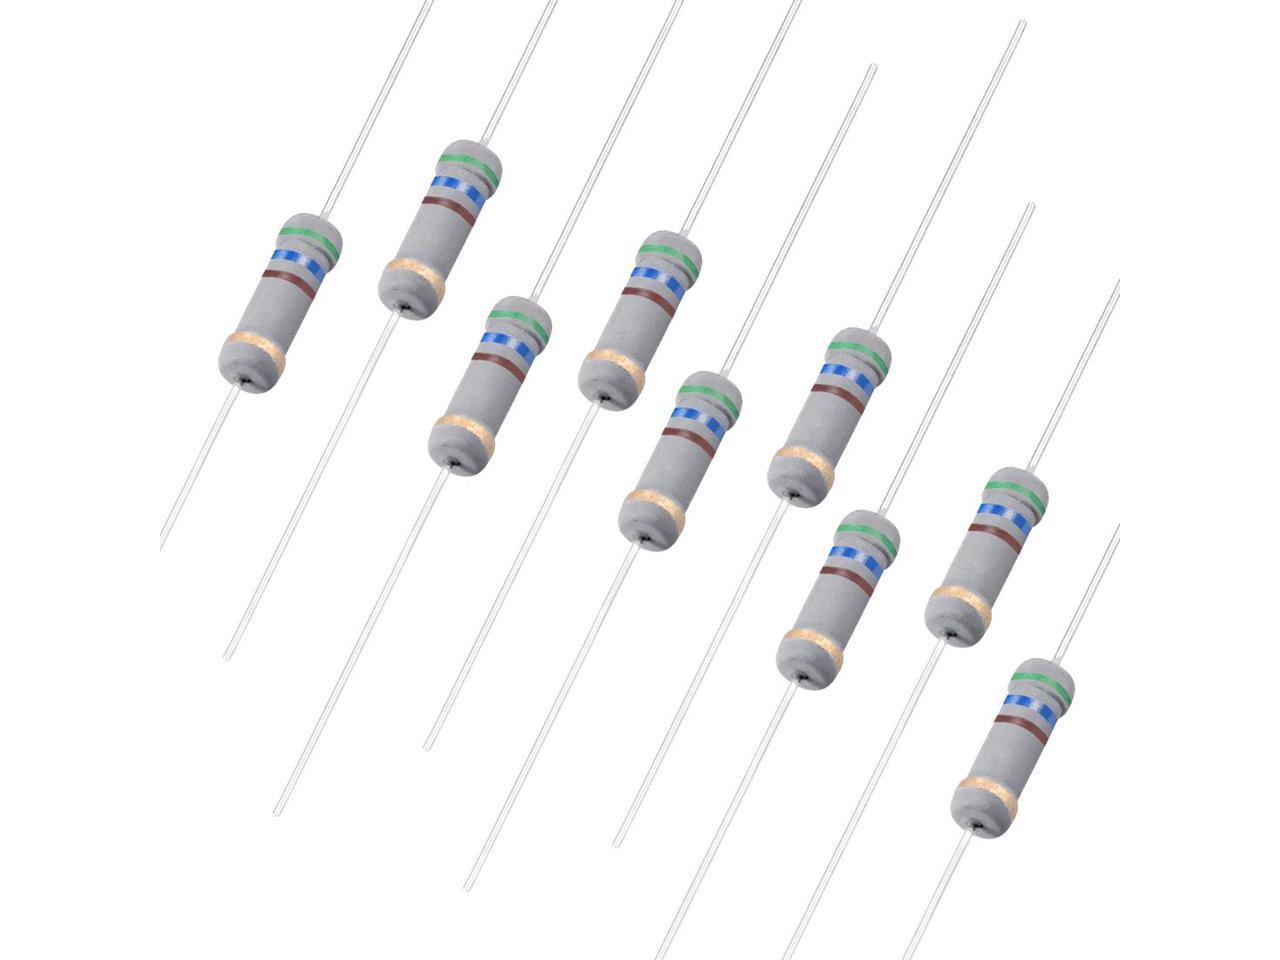 1W 560 Ohm Carbon Film Resistor 5% Tolerance 4 Color Bands Fixed.